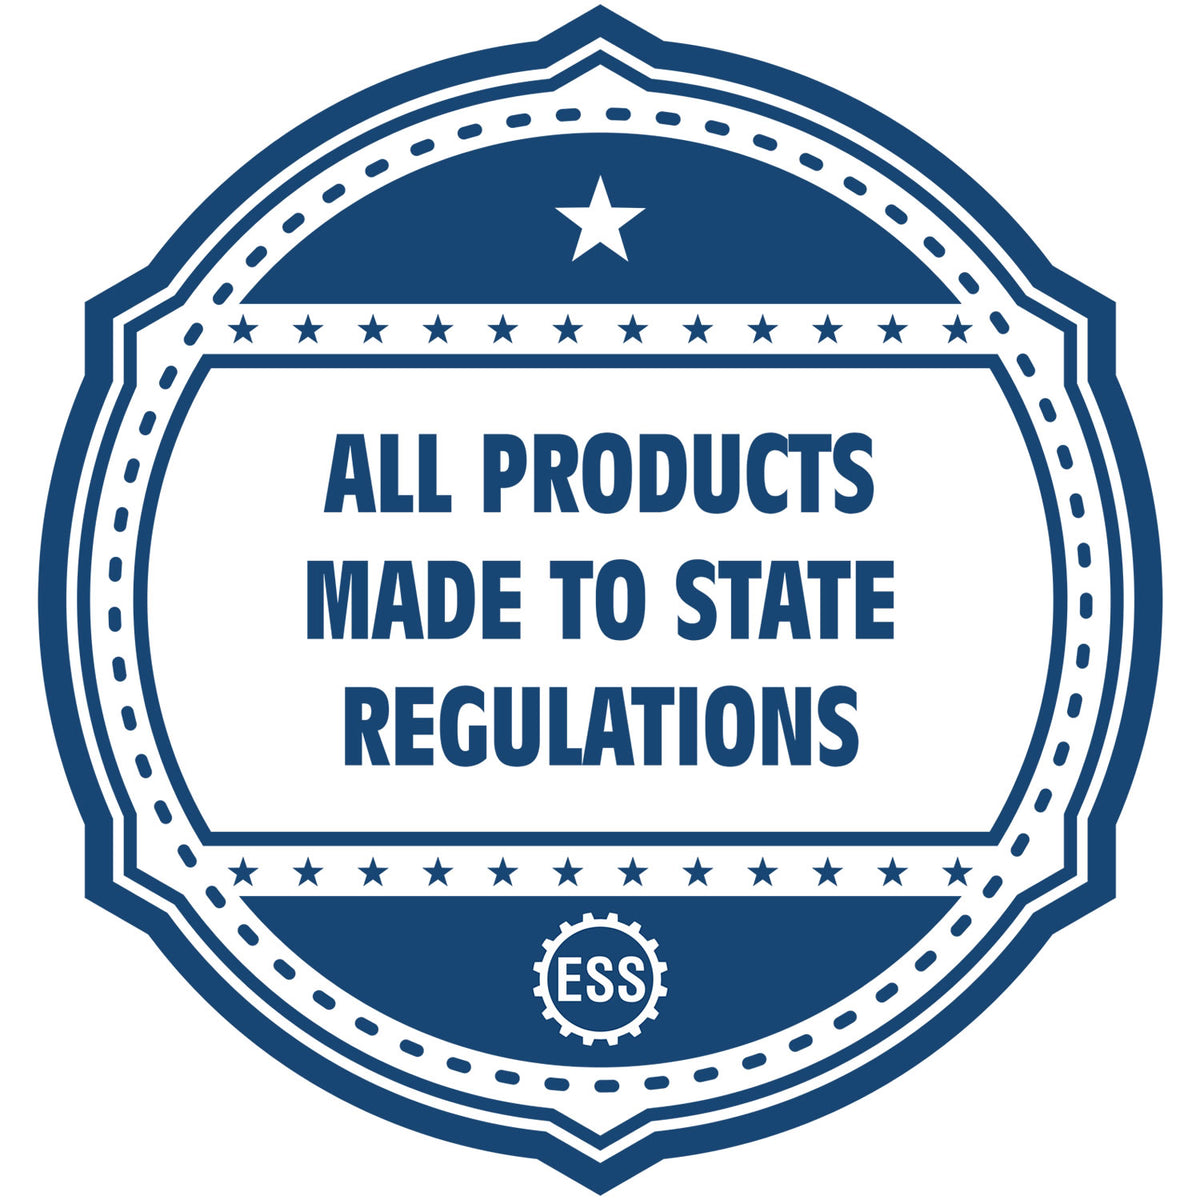 A blue icon or badge for the Hybrid Vermont Architect Seal showing that this product is made in compliance with state regulations.